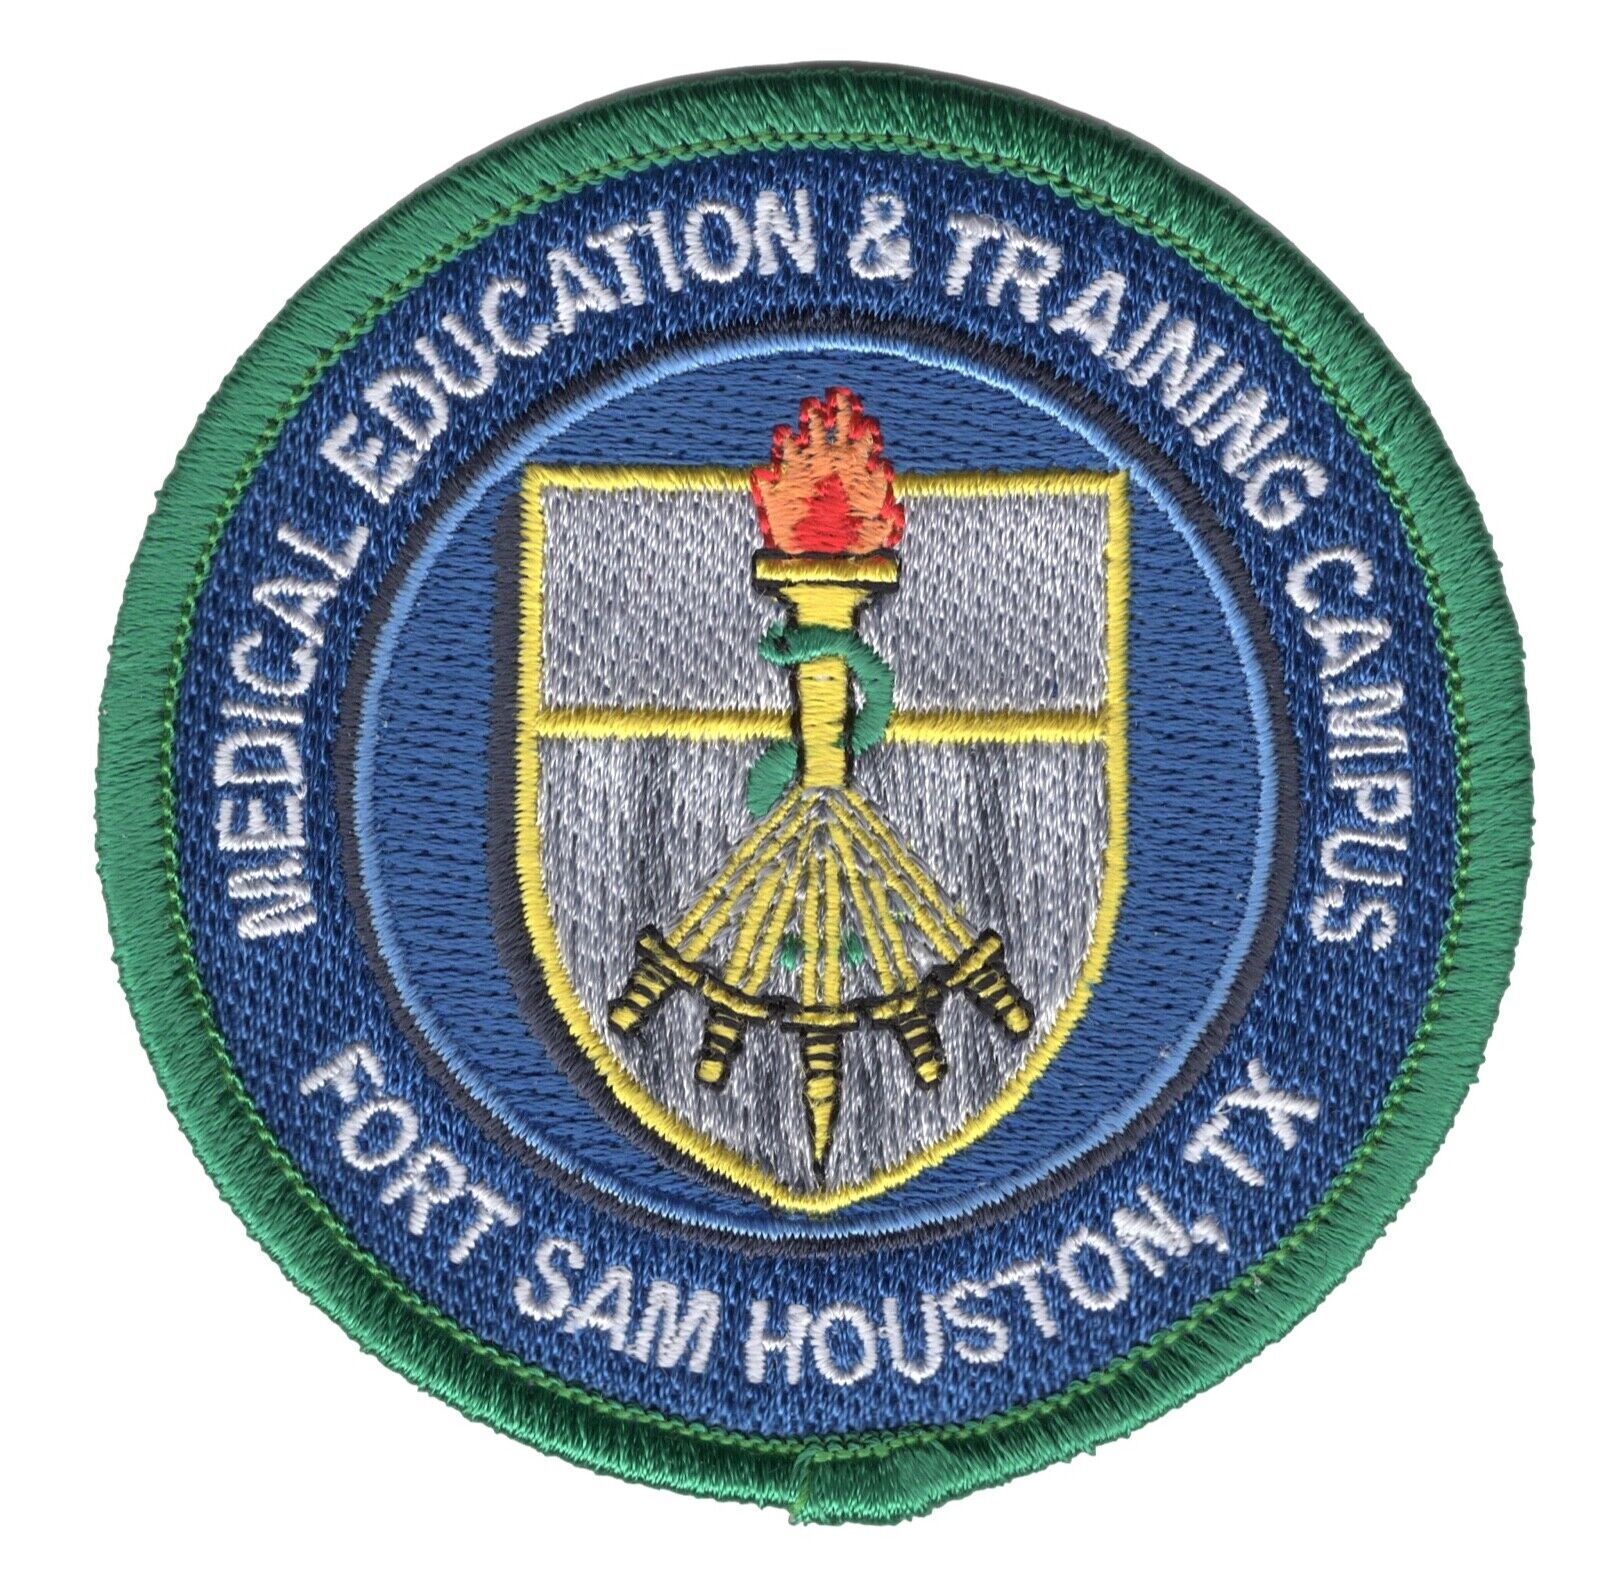 Medical Education & Training Campus Fort Sam Houston Texas Patch